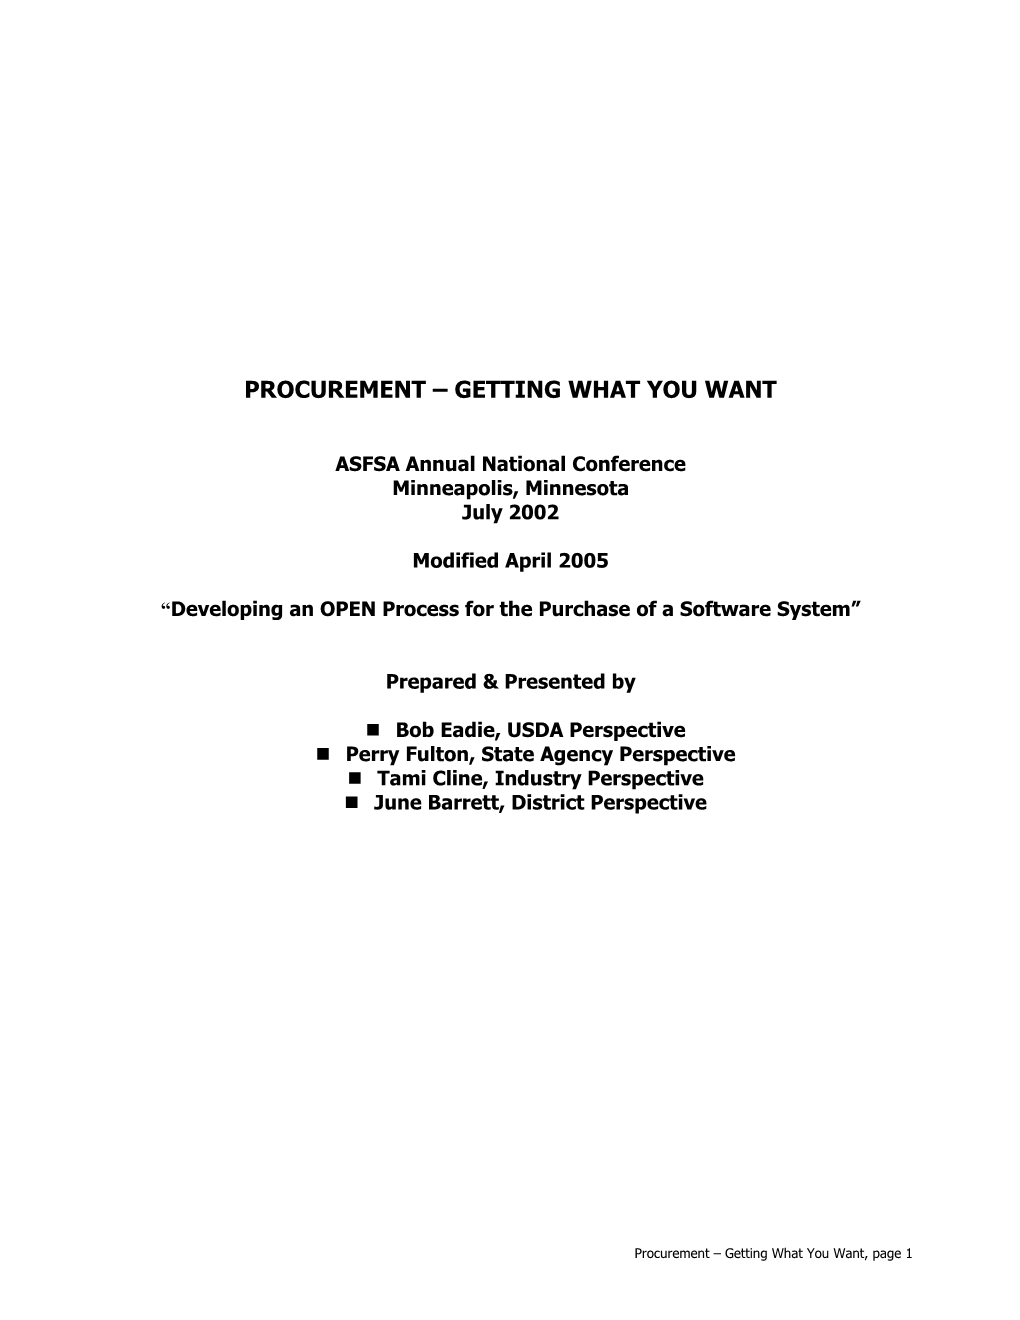 Procurement - Getting What You Want